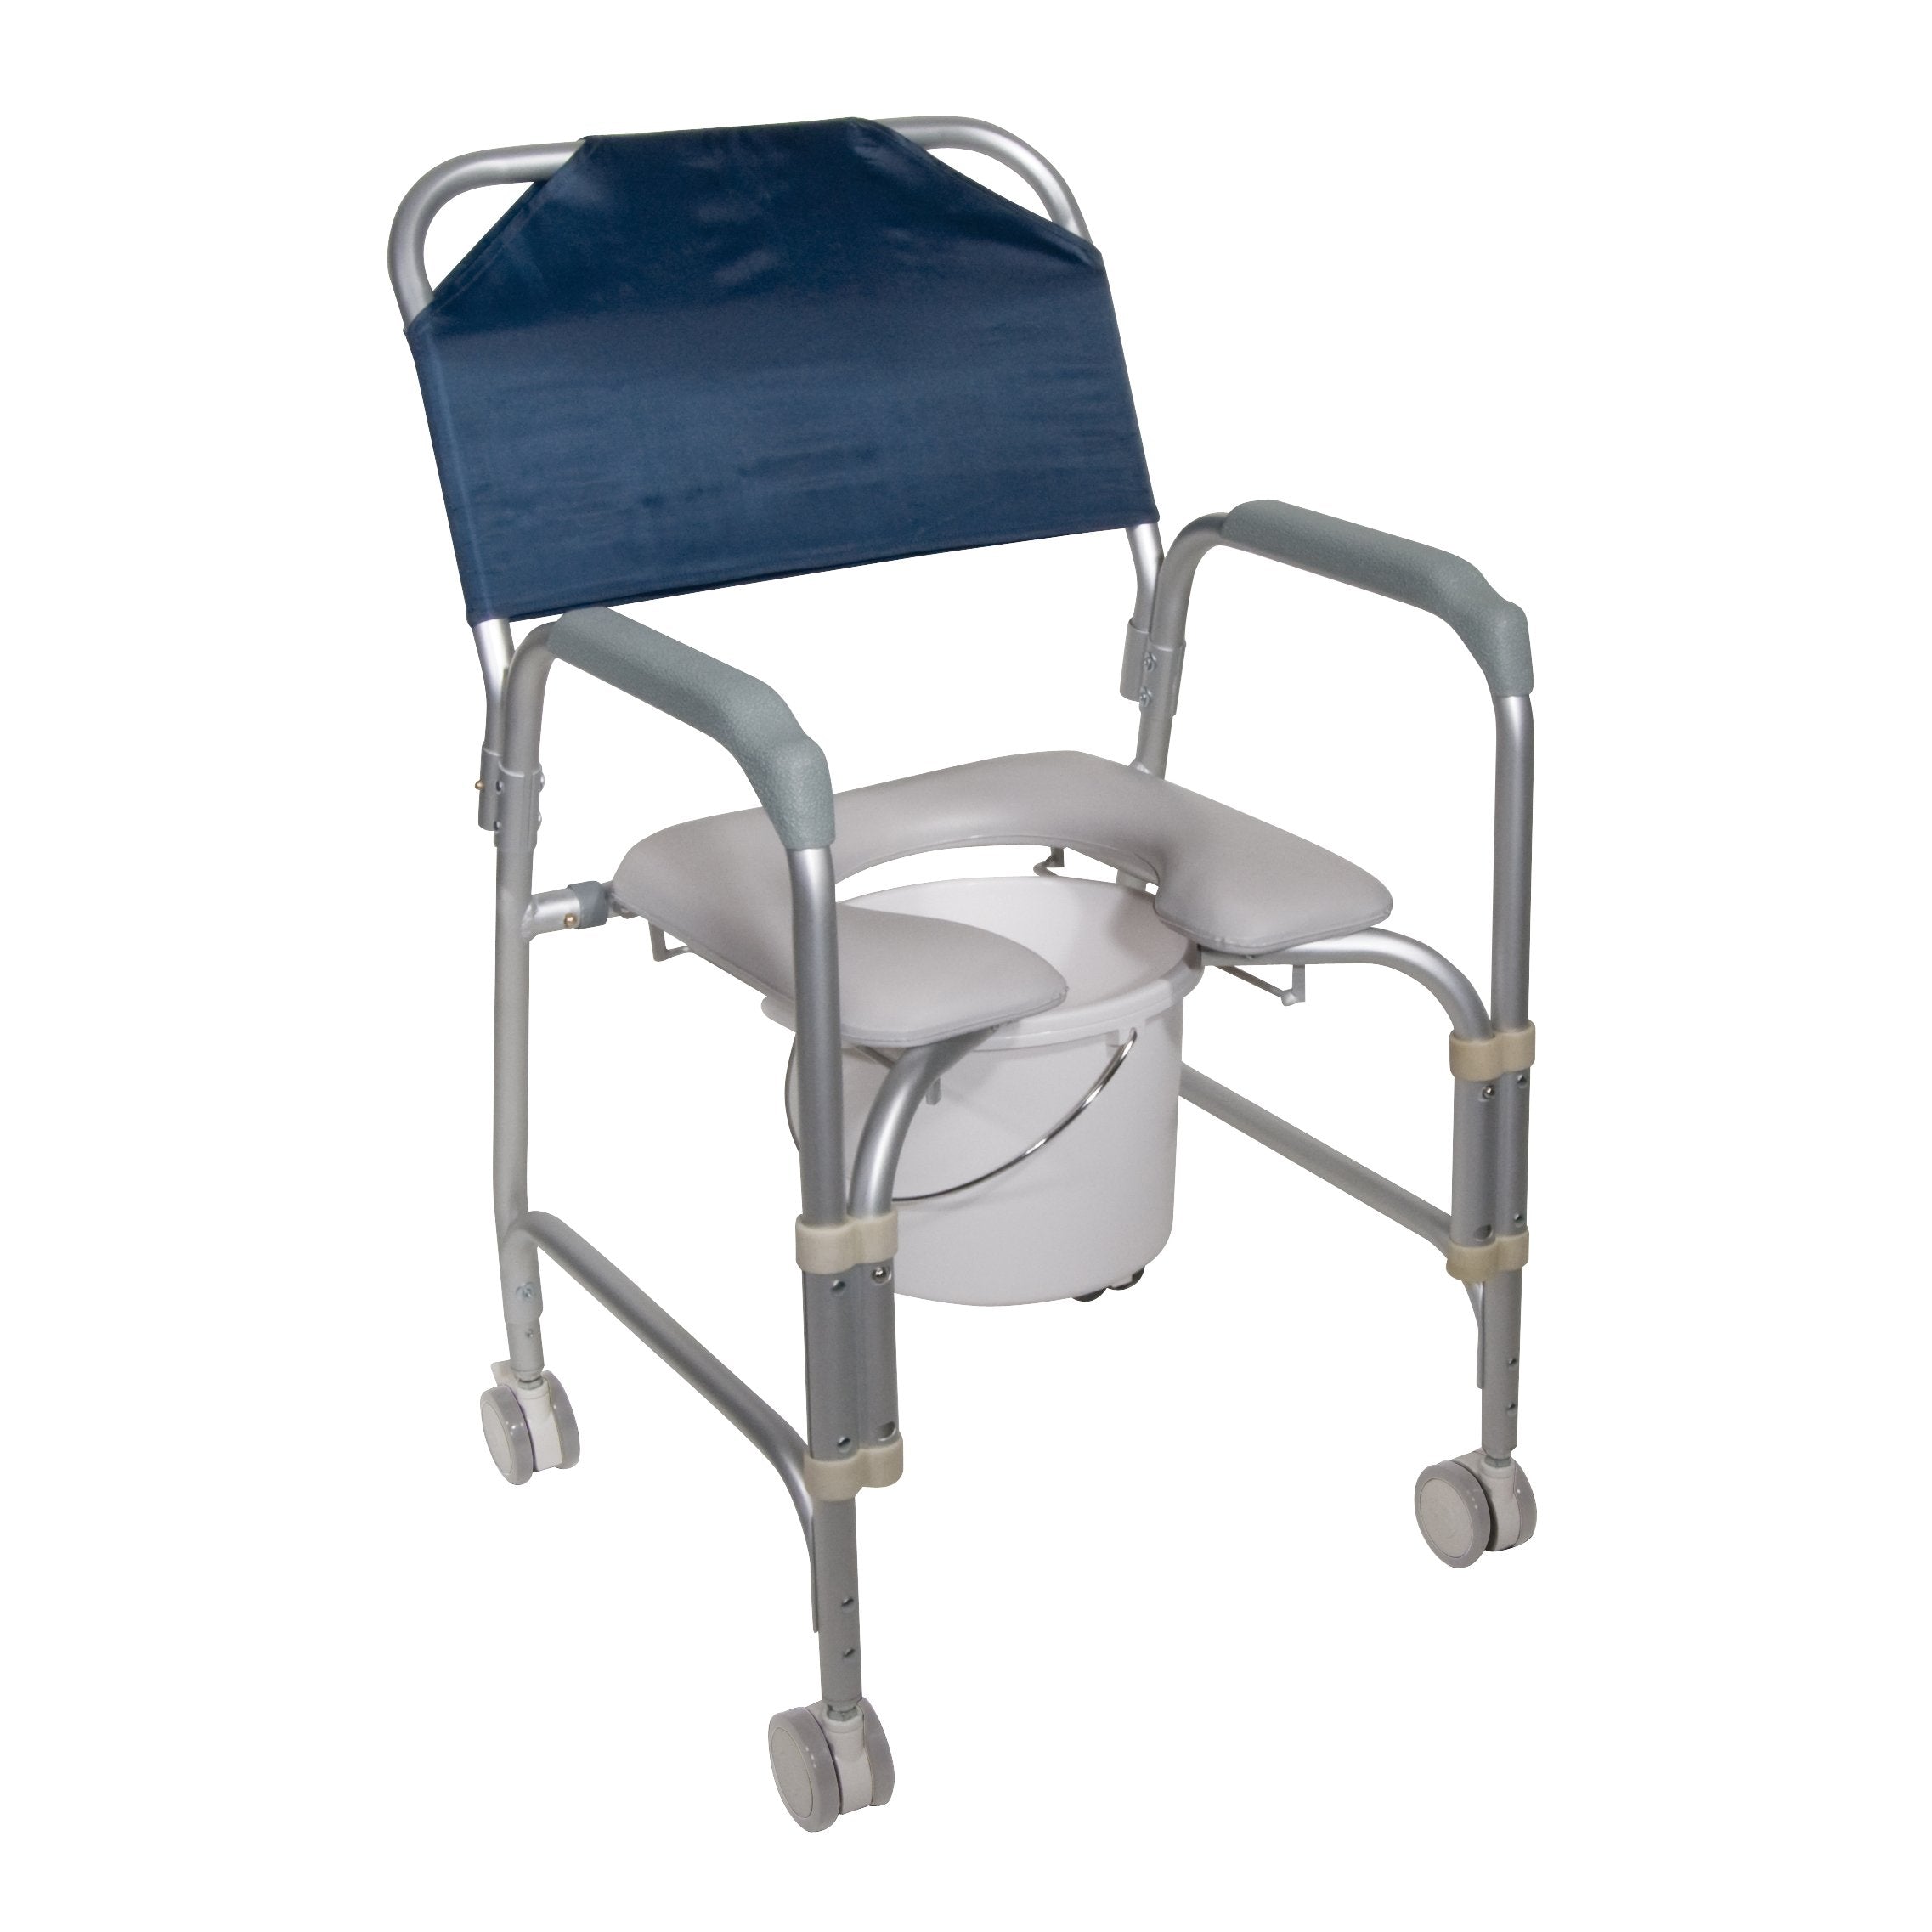 Commode / Shower Chair drive™ Fixed Arms Aluminum Frame 16 Inch Seat Width 300 lbs. Weight Capacity